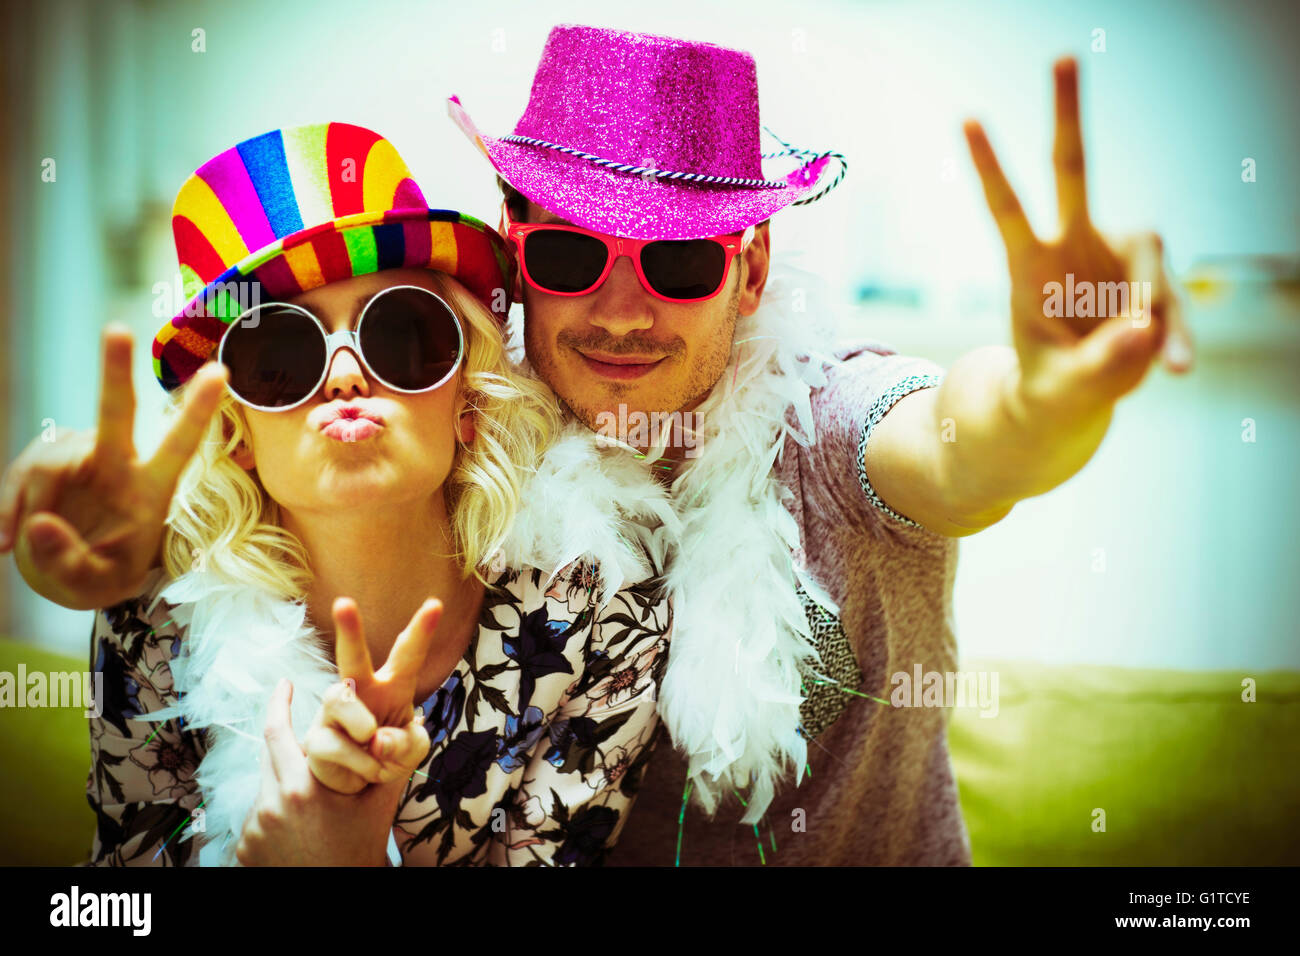 Portrait playful couple in costume sunglasses and hats gesturing peace sign Stock Photo